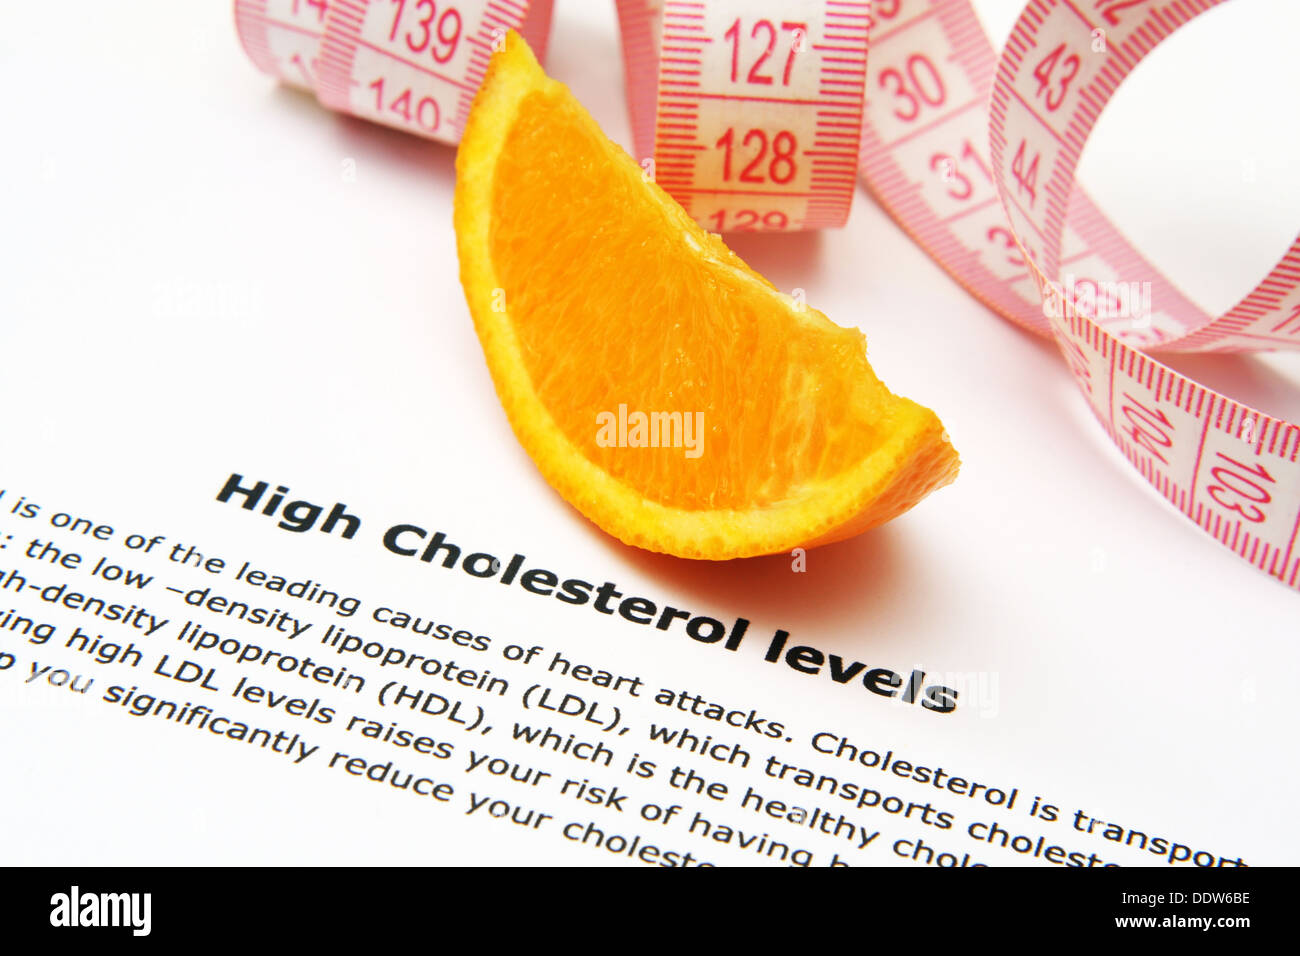 High cholesterol levels text on white paper Stock Photo